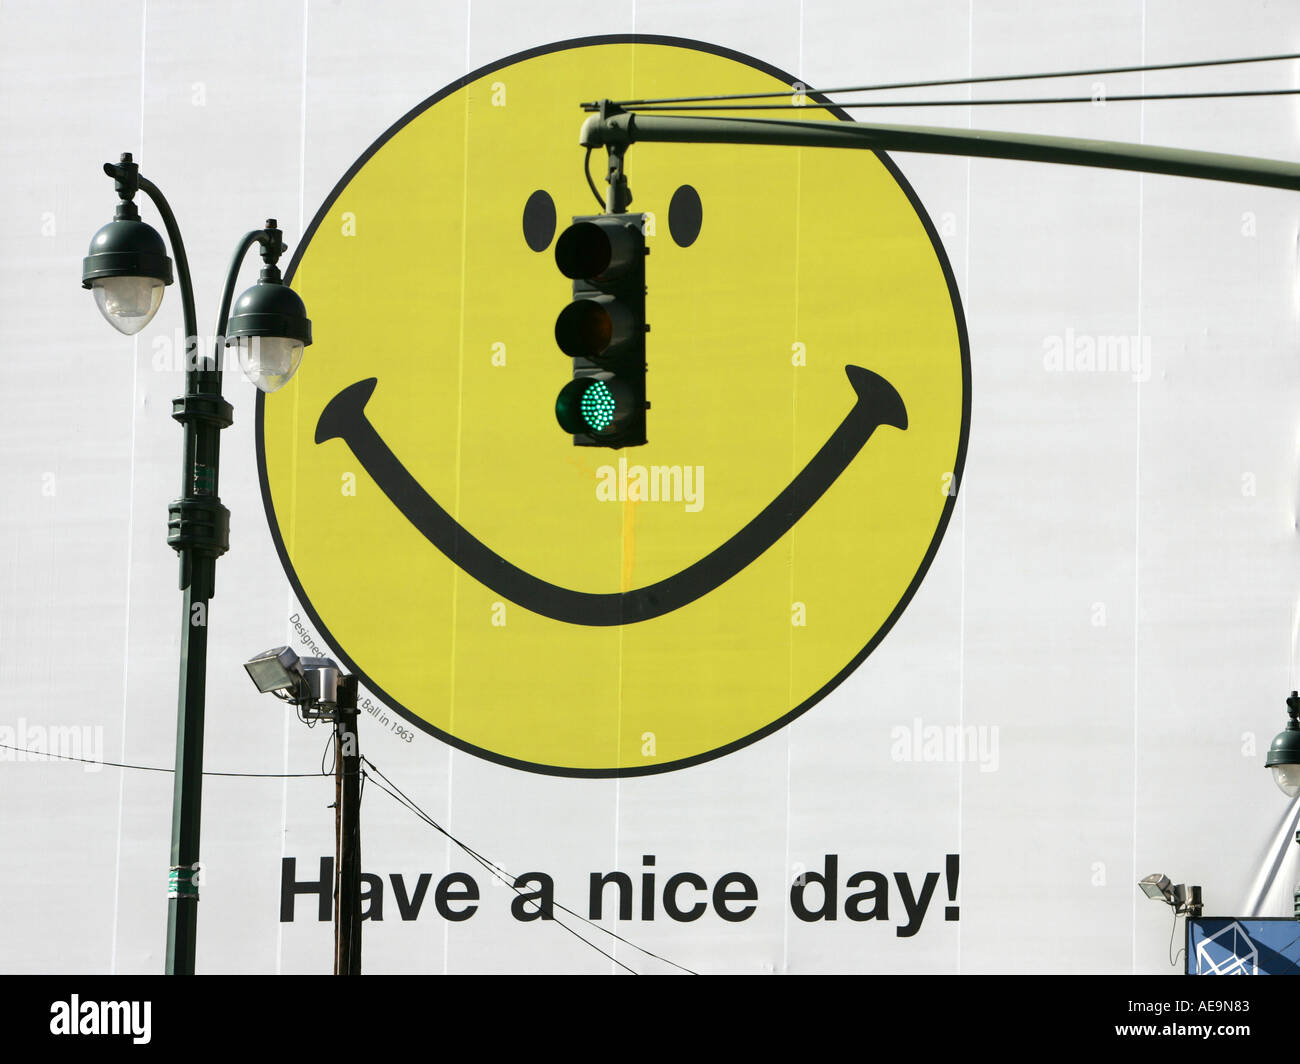 Billboard of New York Post newspaper with a smiley logo at 9th Avenue 33rd Street Stock Photo